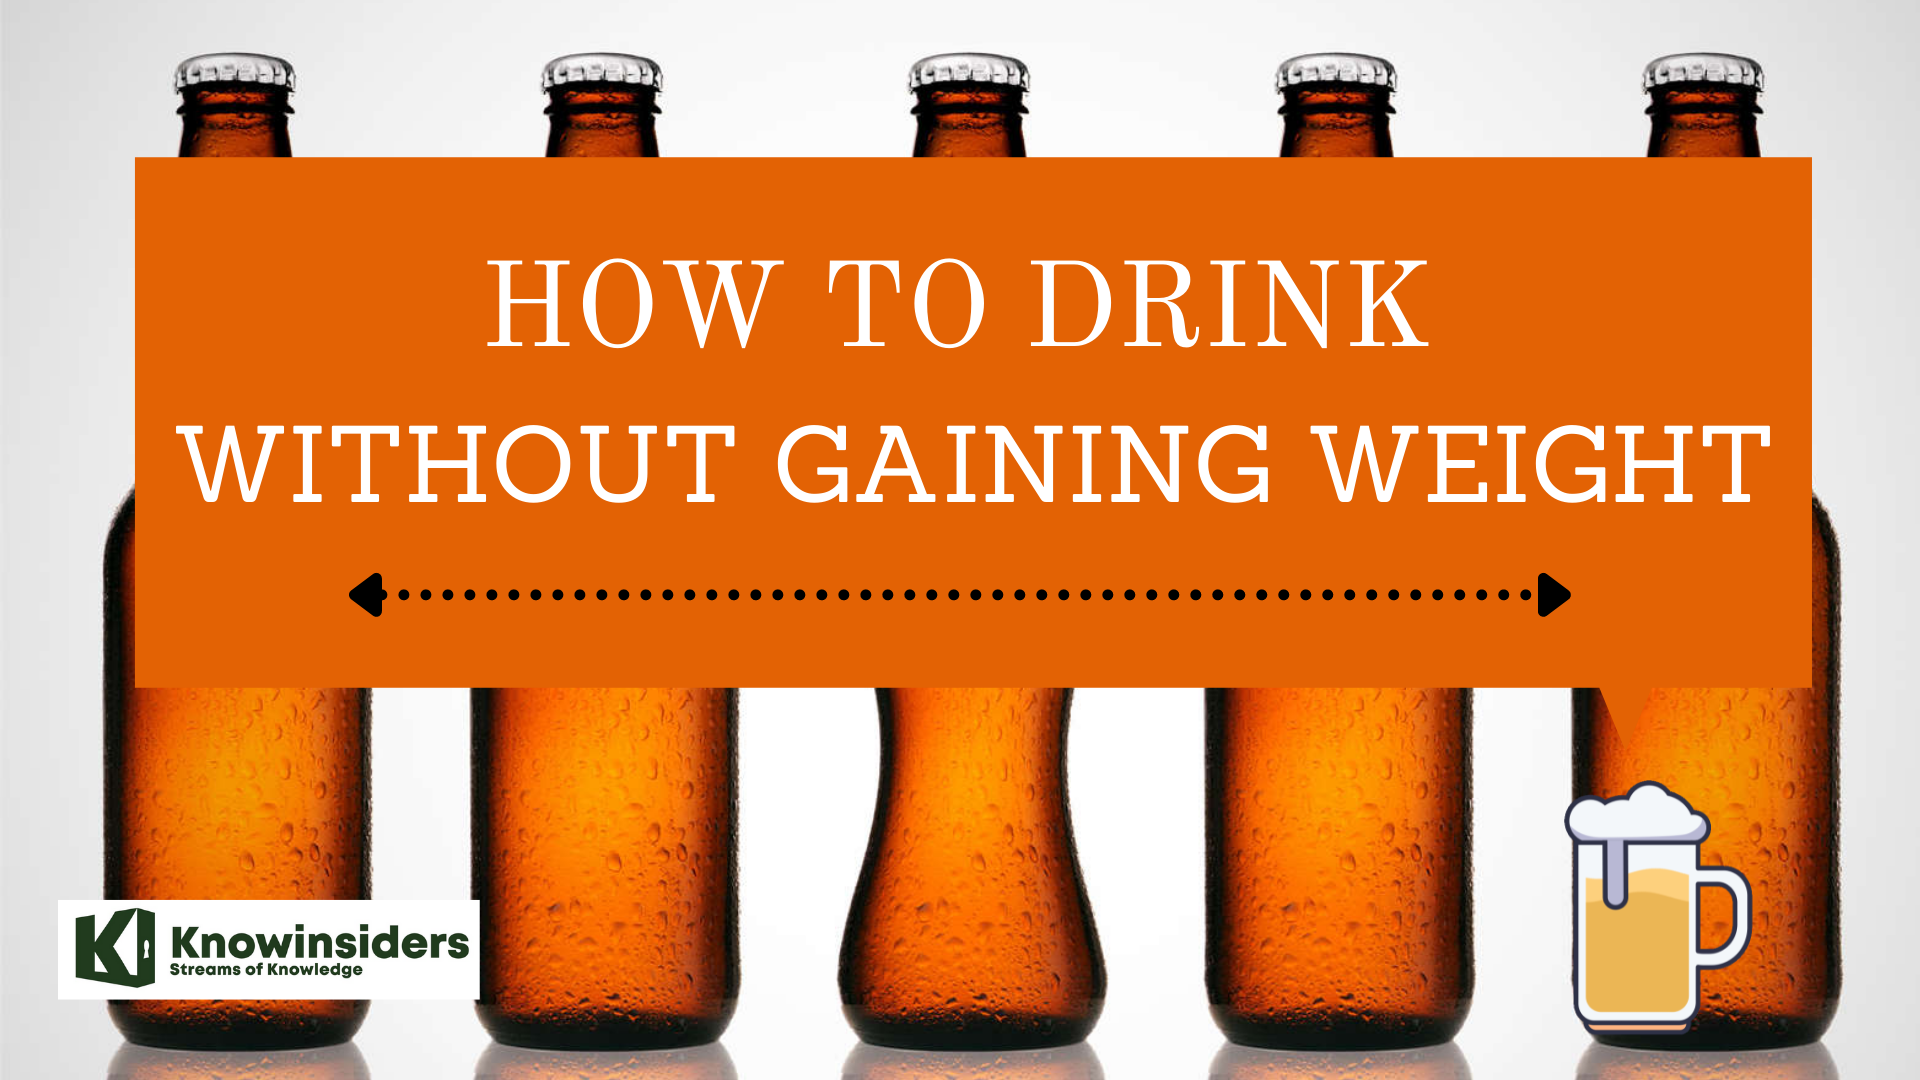 How To Drink Beer Without Gaining Weight